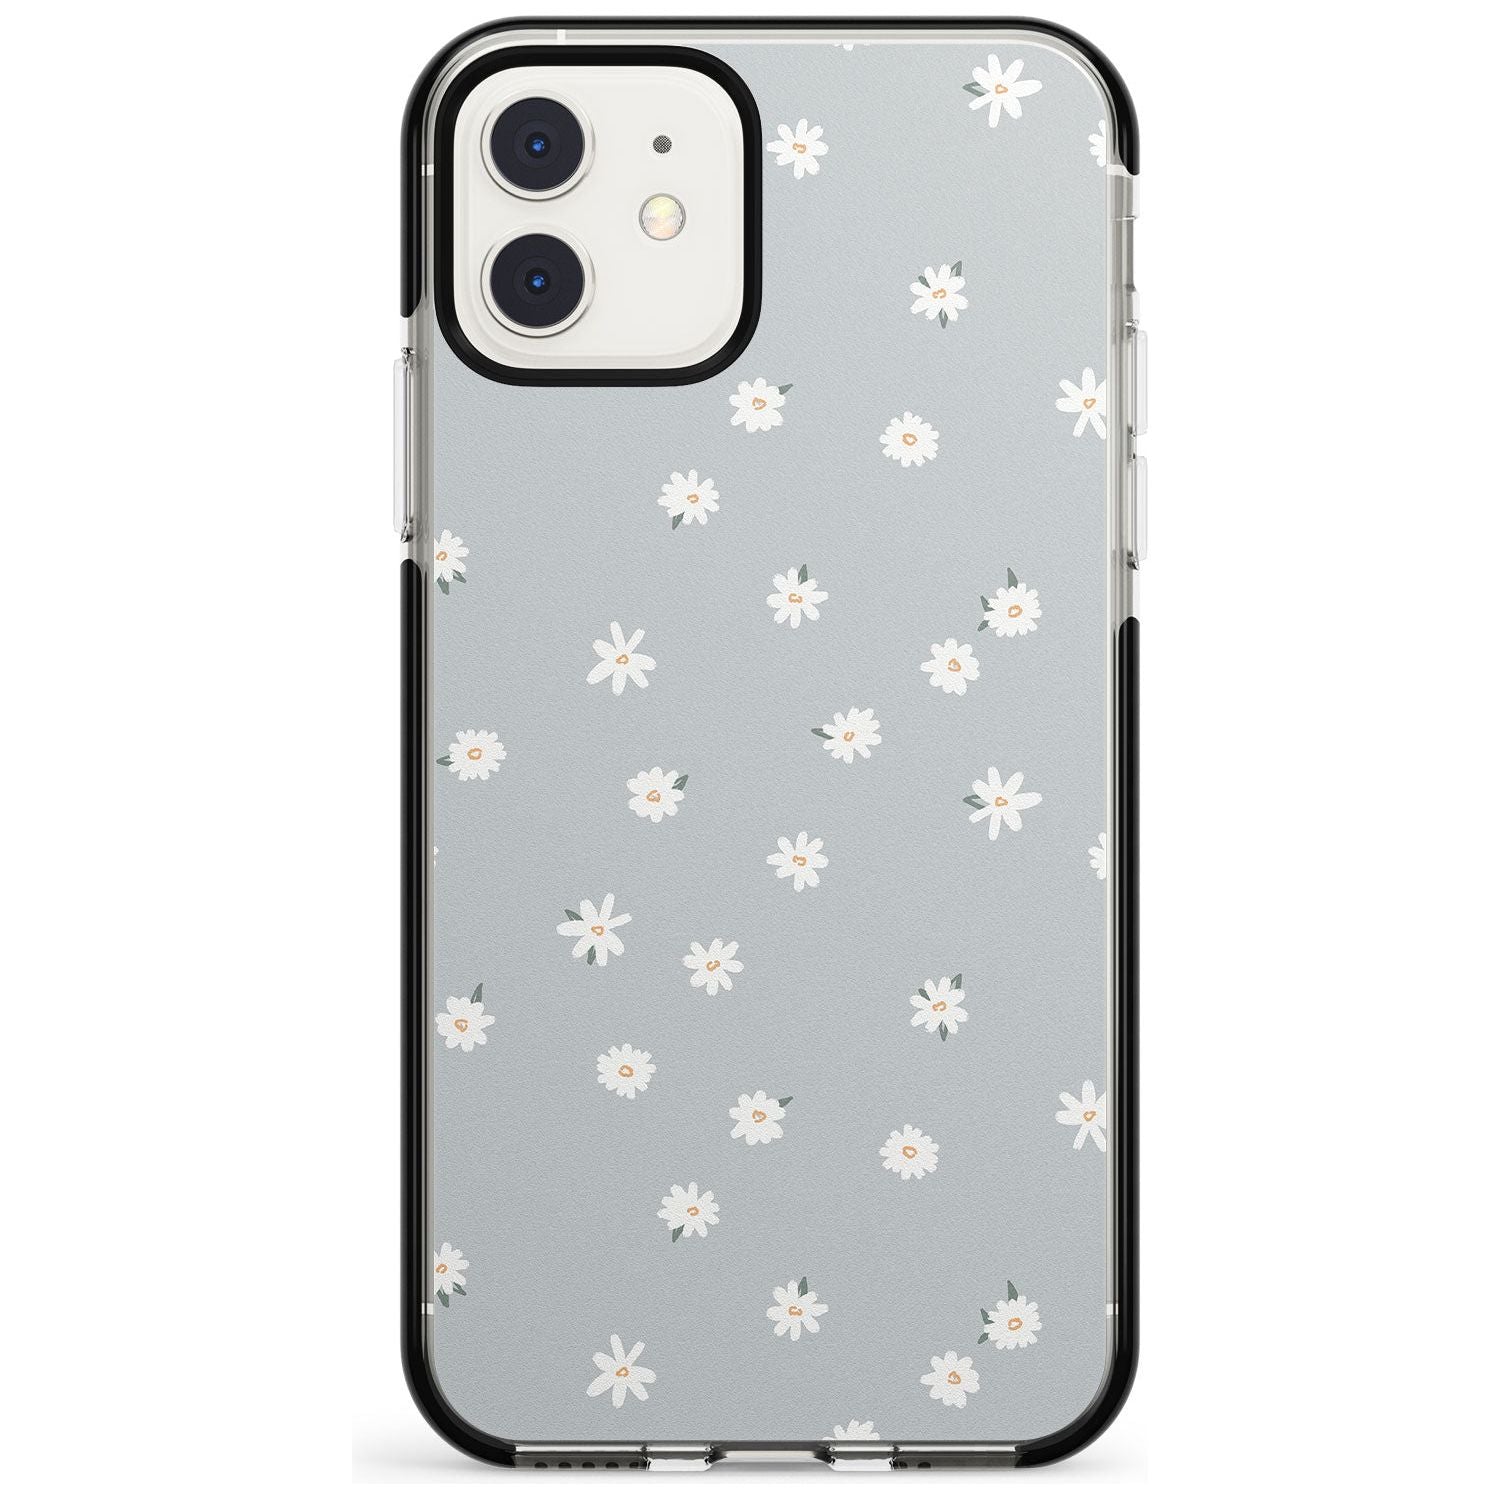 Painted Daises - Blue-Grey Cute Floral Design Pink Fade Impact Phone Case for iPhone 11 Pro Max